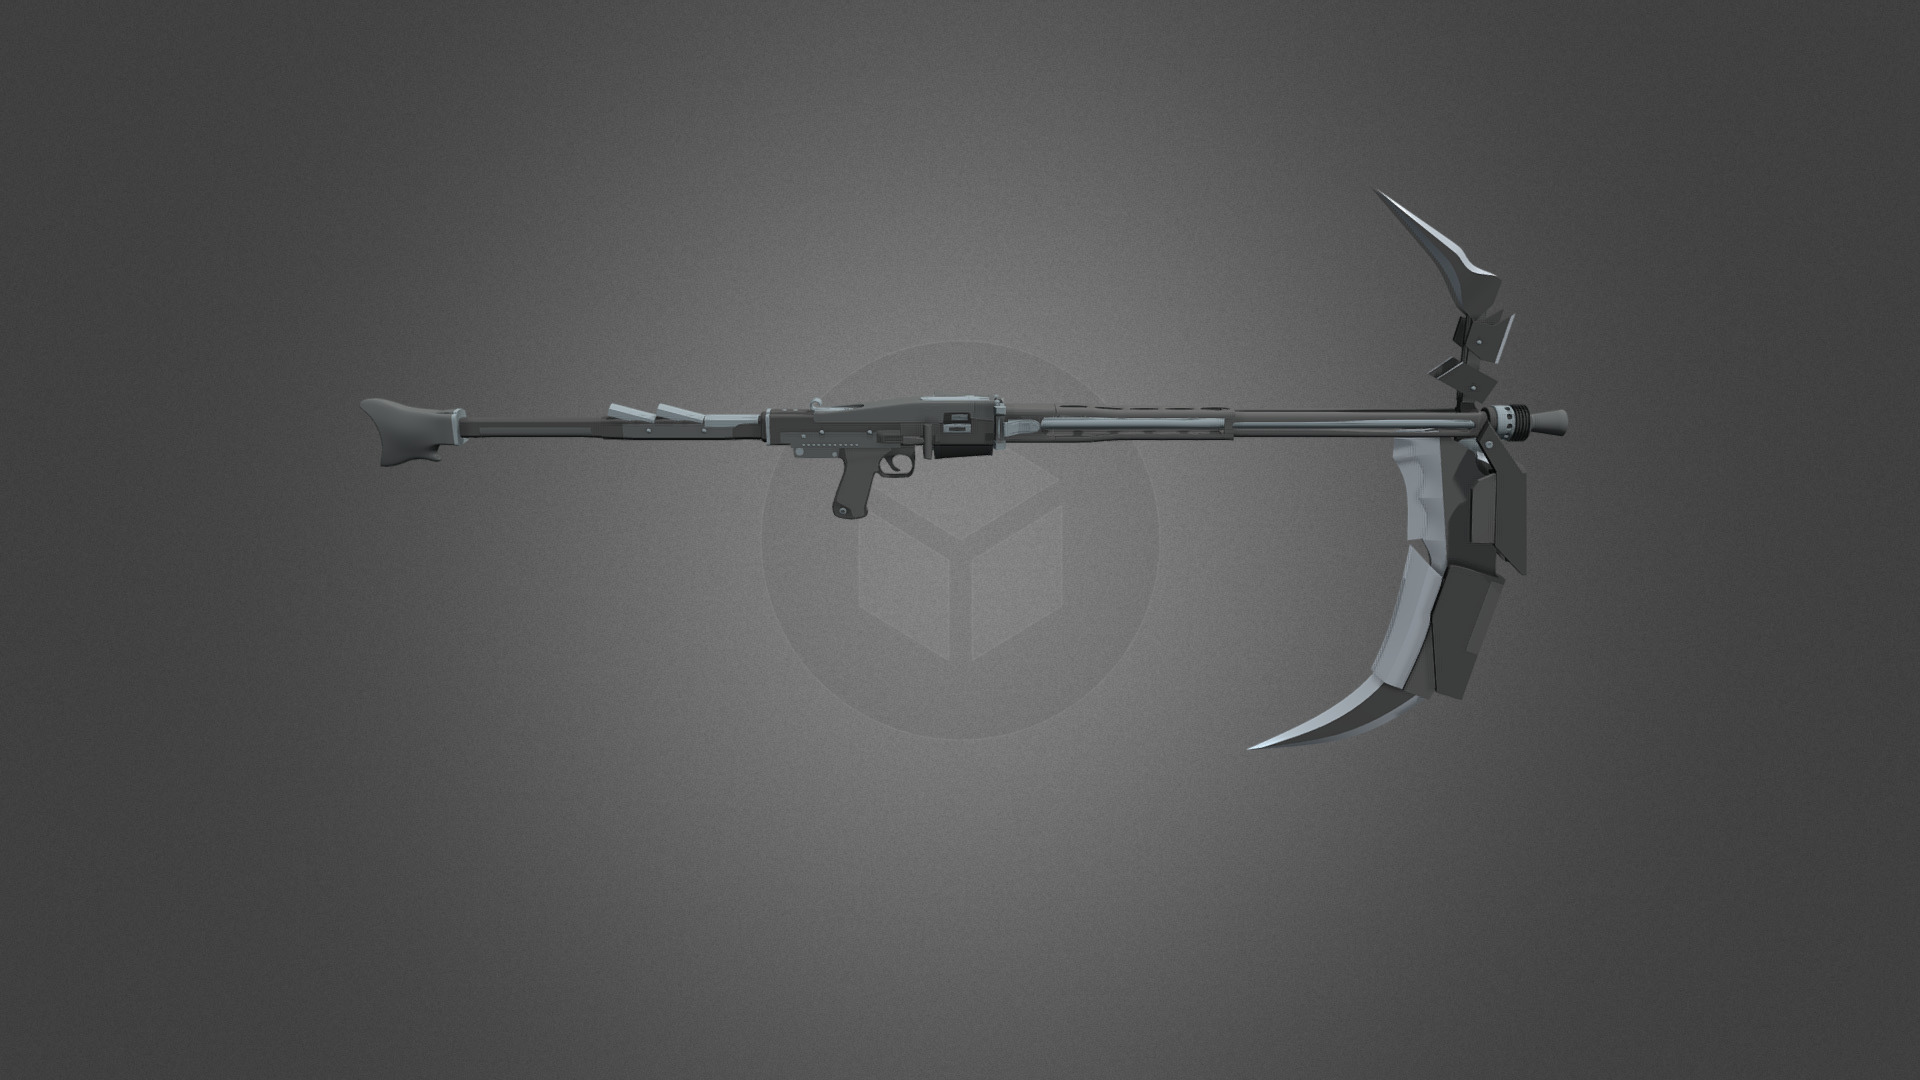 A commissioned weapon based off of the animated show RWBY by Roosterteeth. 

Weapon designed, modeled and animated by DenalCC1010, with original design and creative direction from natedog4043 ( www.deviantart.com/natedog4043 )

Created using Blender ( www.blender.org/ )

Please do not use without permission 3d model